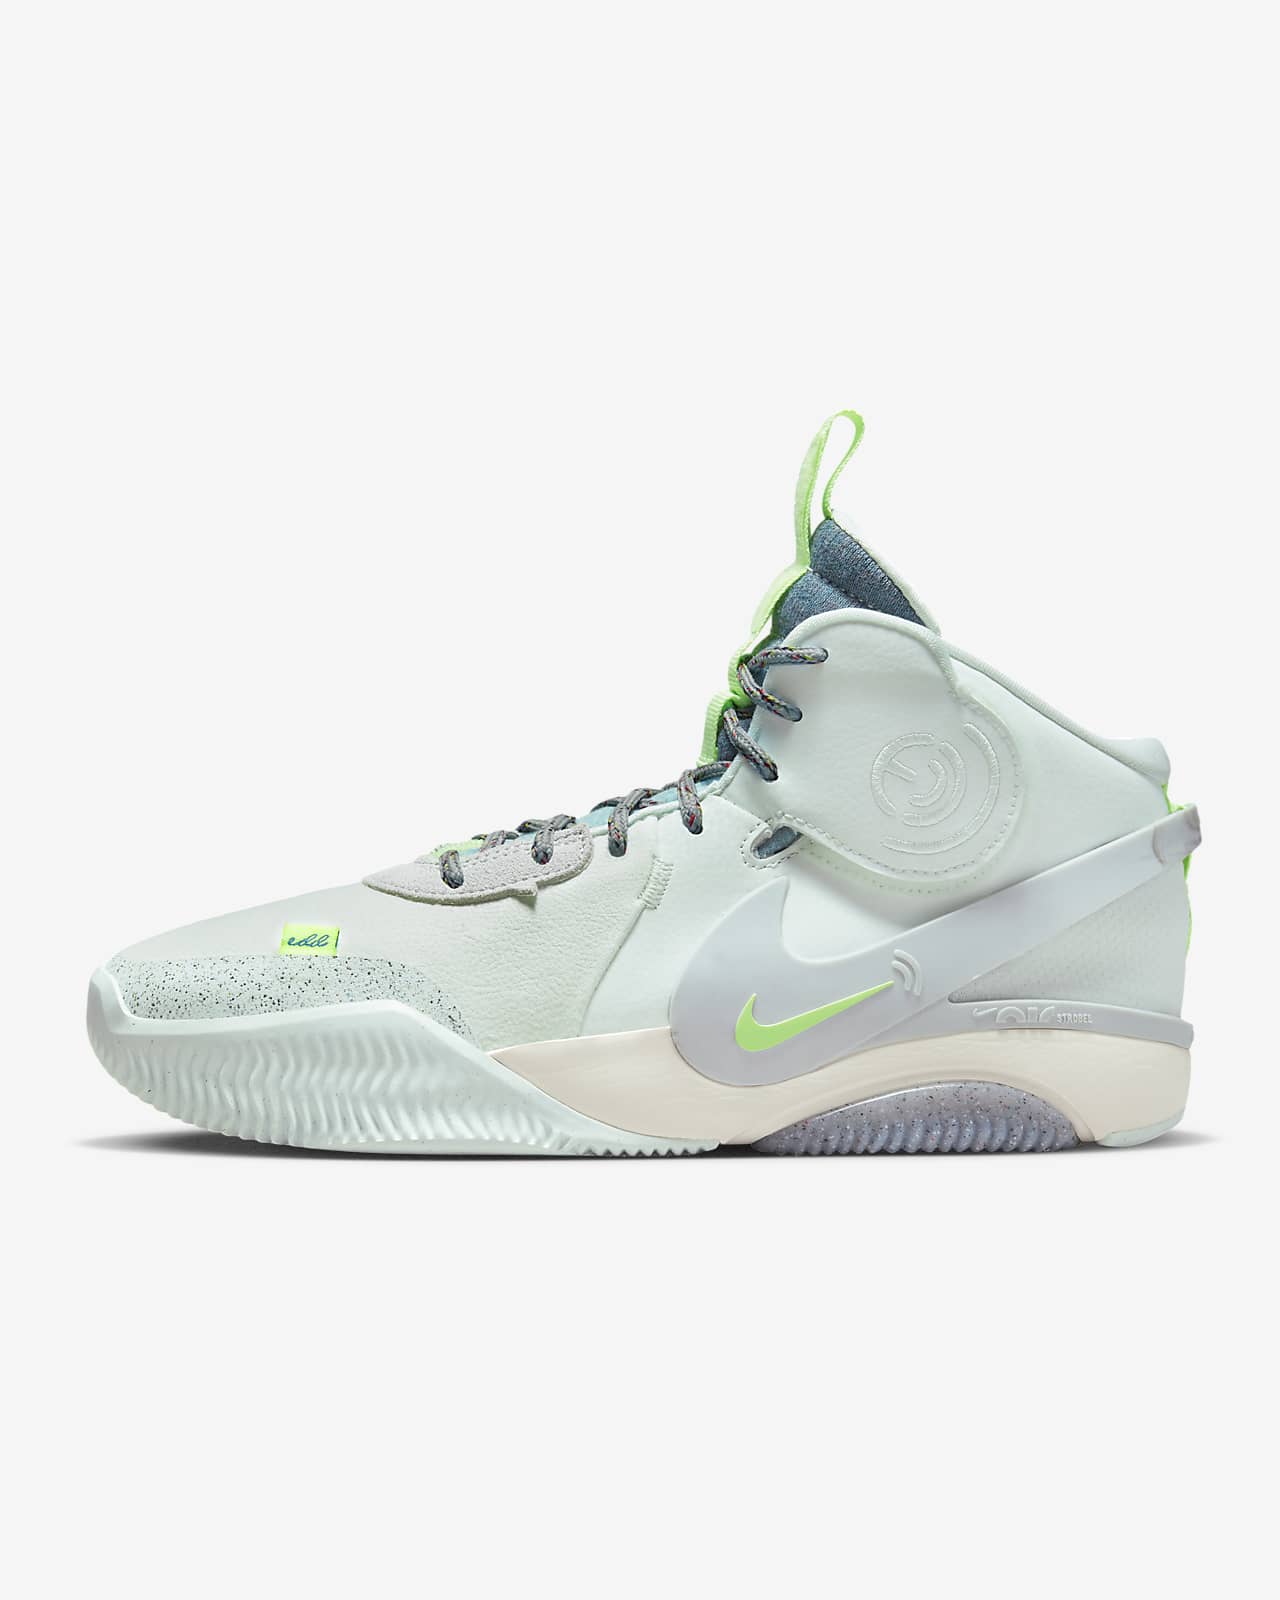 Nike Air Deldon "Lyme" Easy On/Off Basketball Shoes